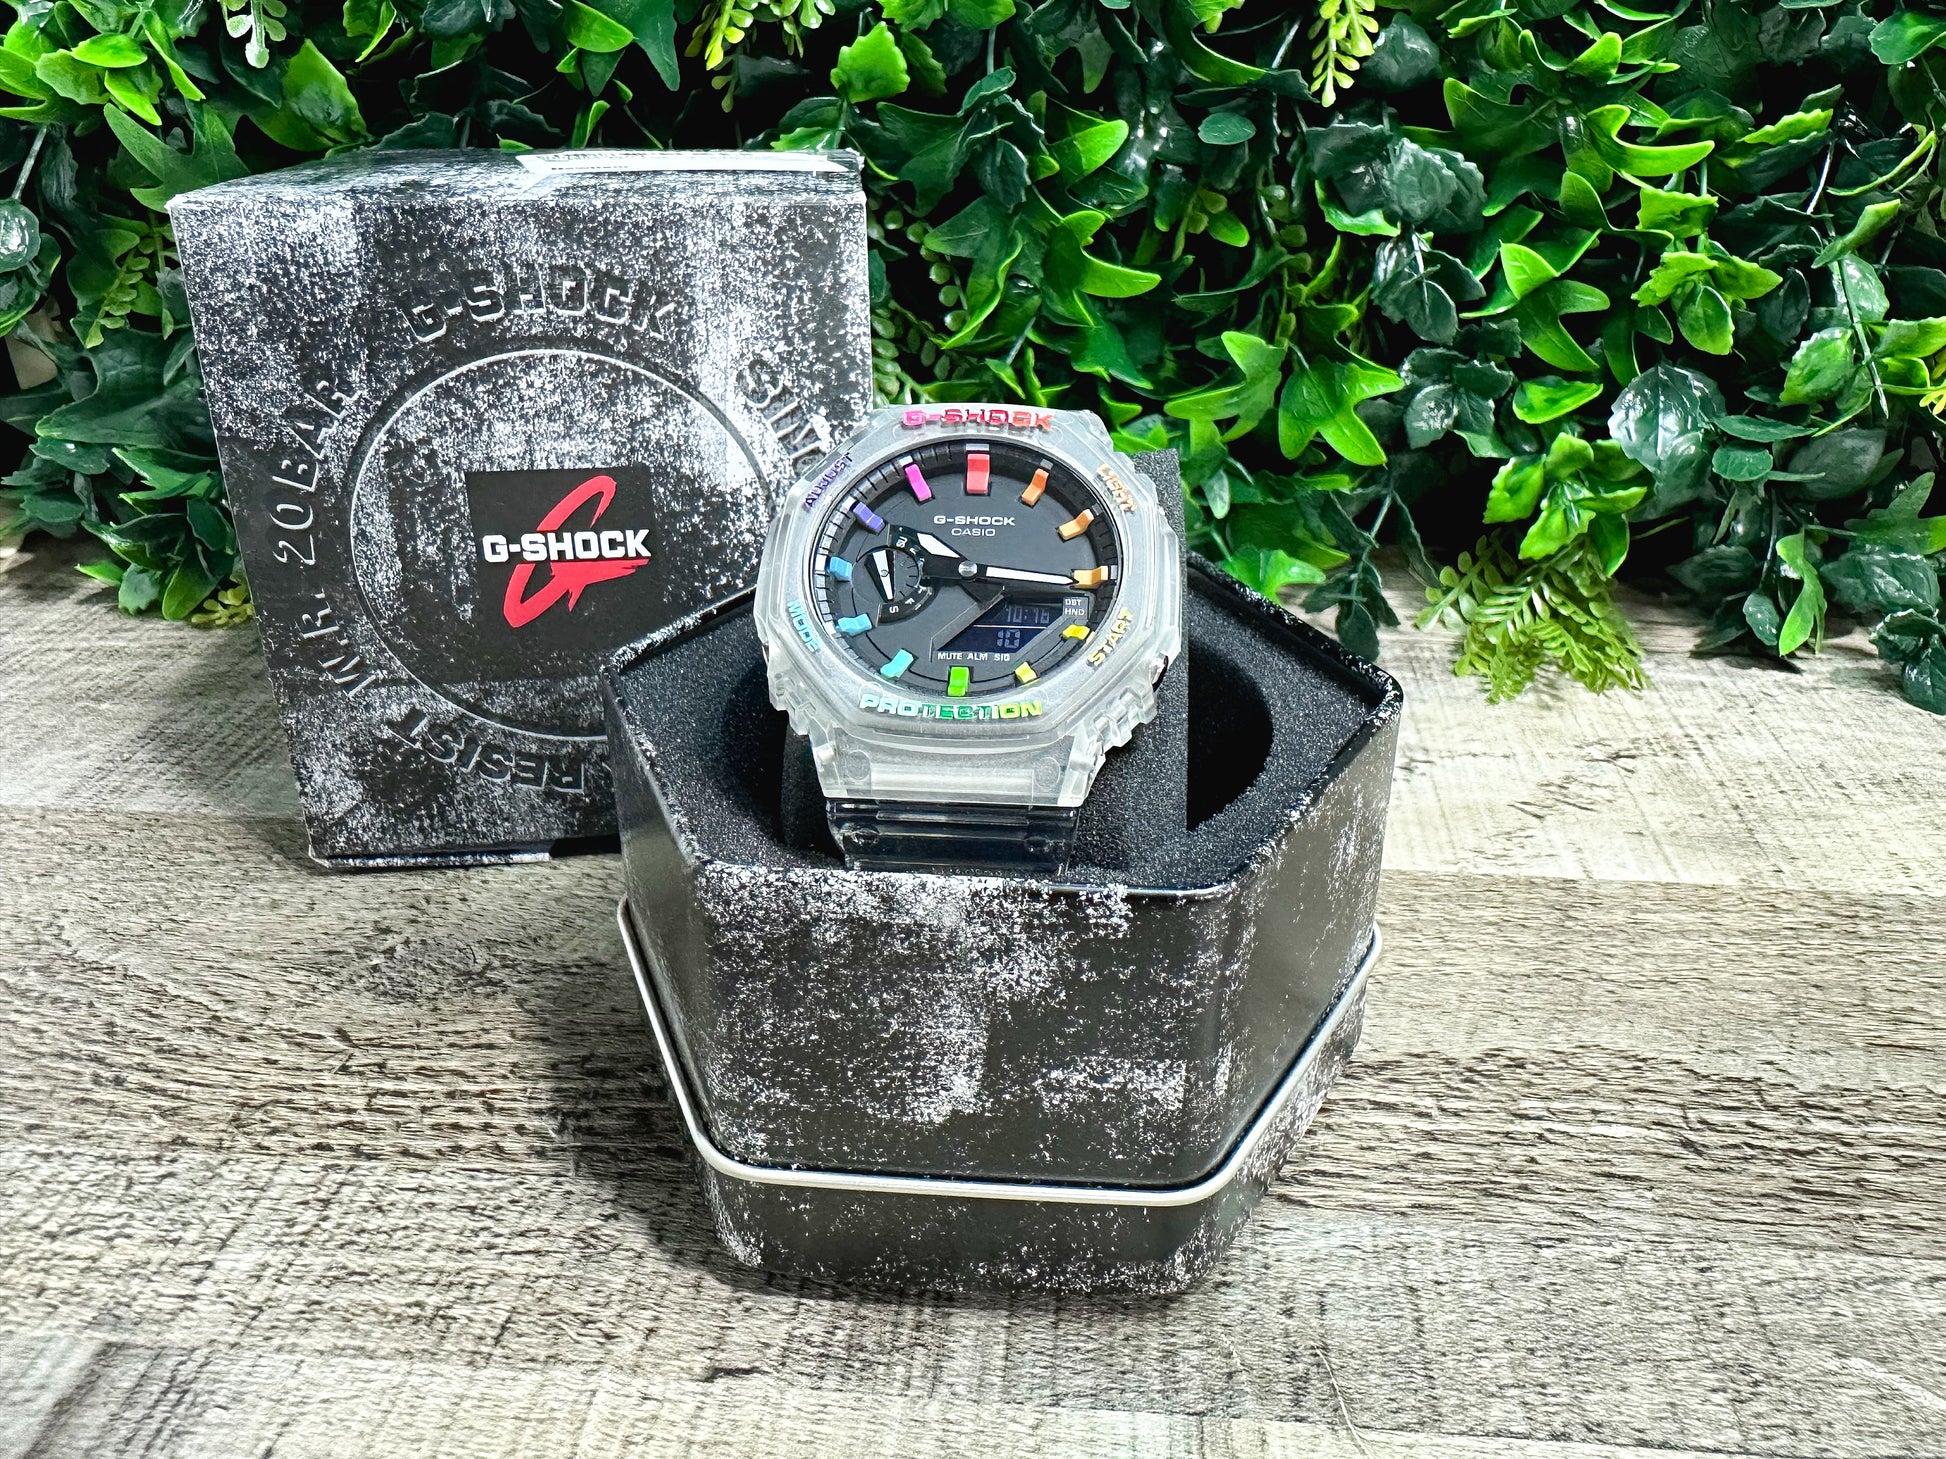 G-Shock CasiOak "Rainbow Jelly" - Clear/Rainbow Hand Painted Genuine Casio GA2100 - Carbon Core Protection - Optional Sapphire Crystal